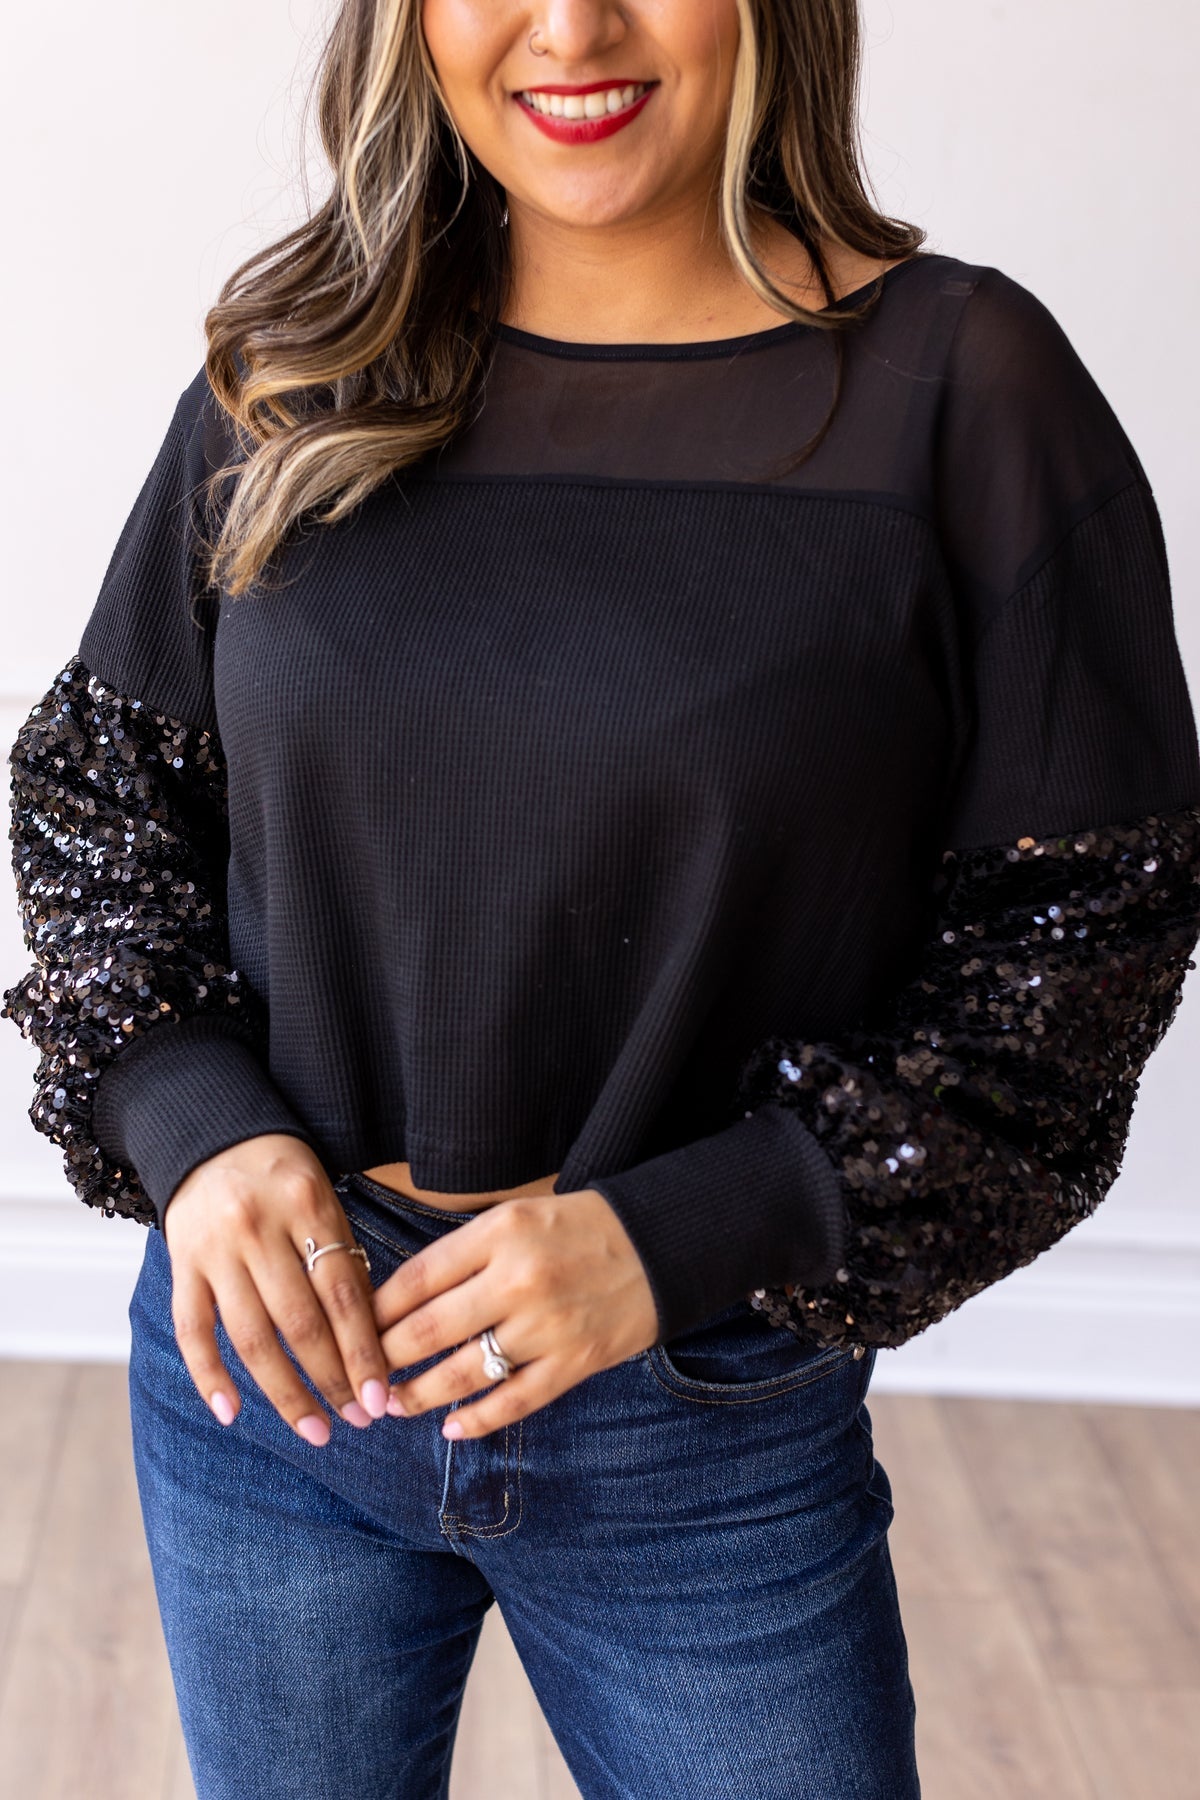 The Holiday Glam Top - Black